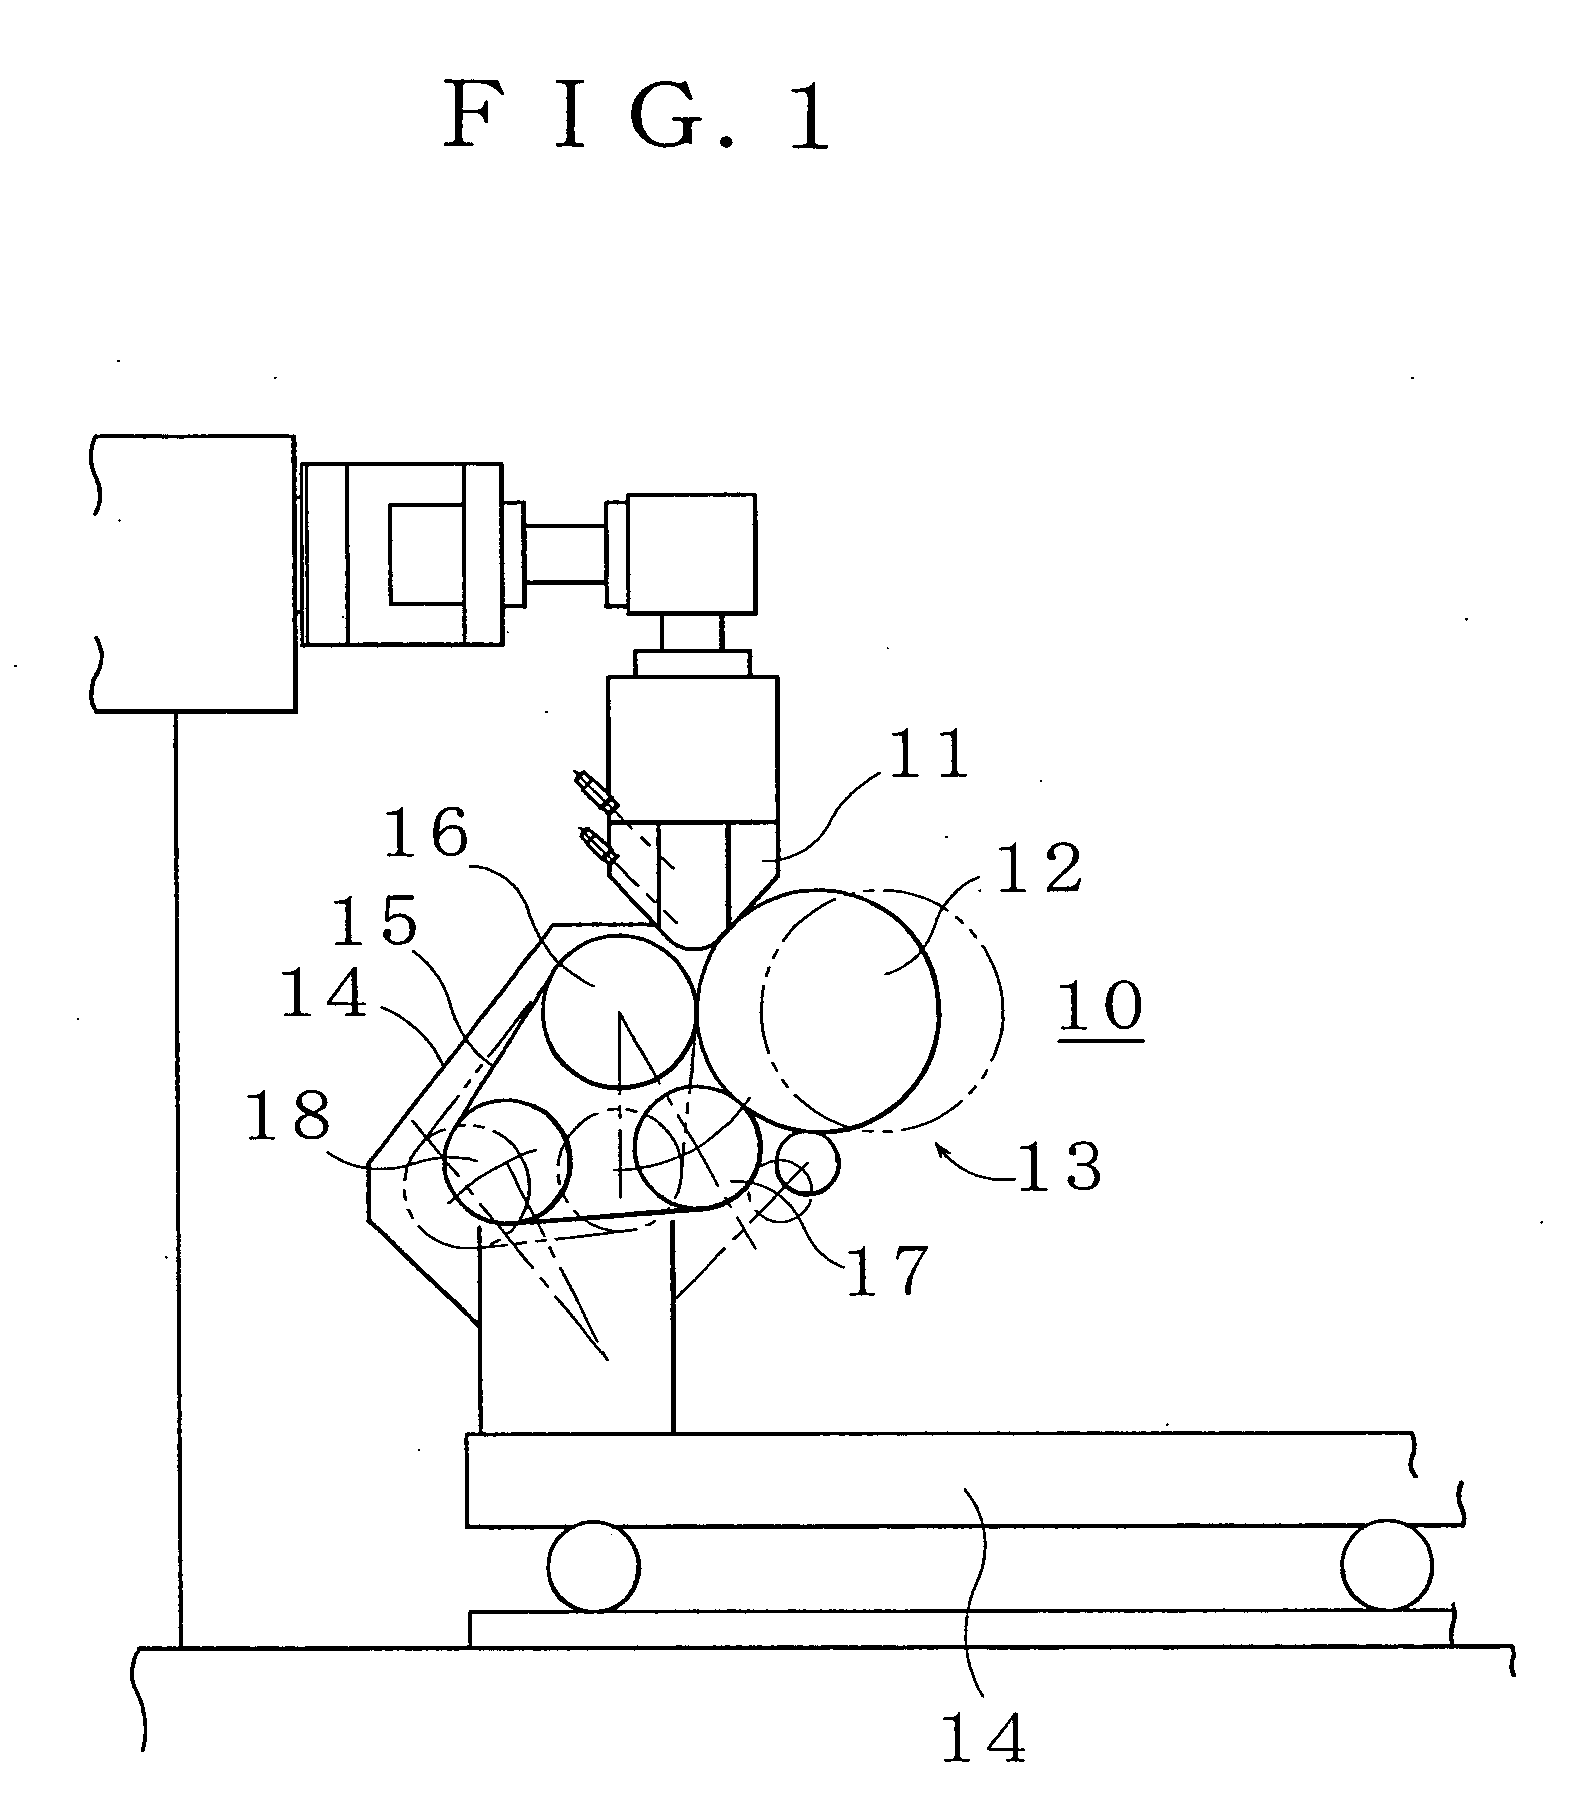 Method and apparatus for manufacturing thermoplastic synthetic resin sheet or film